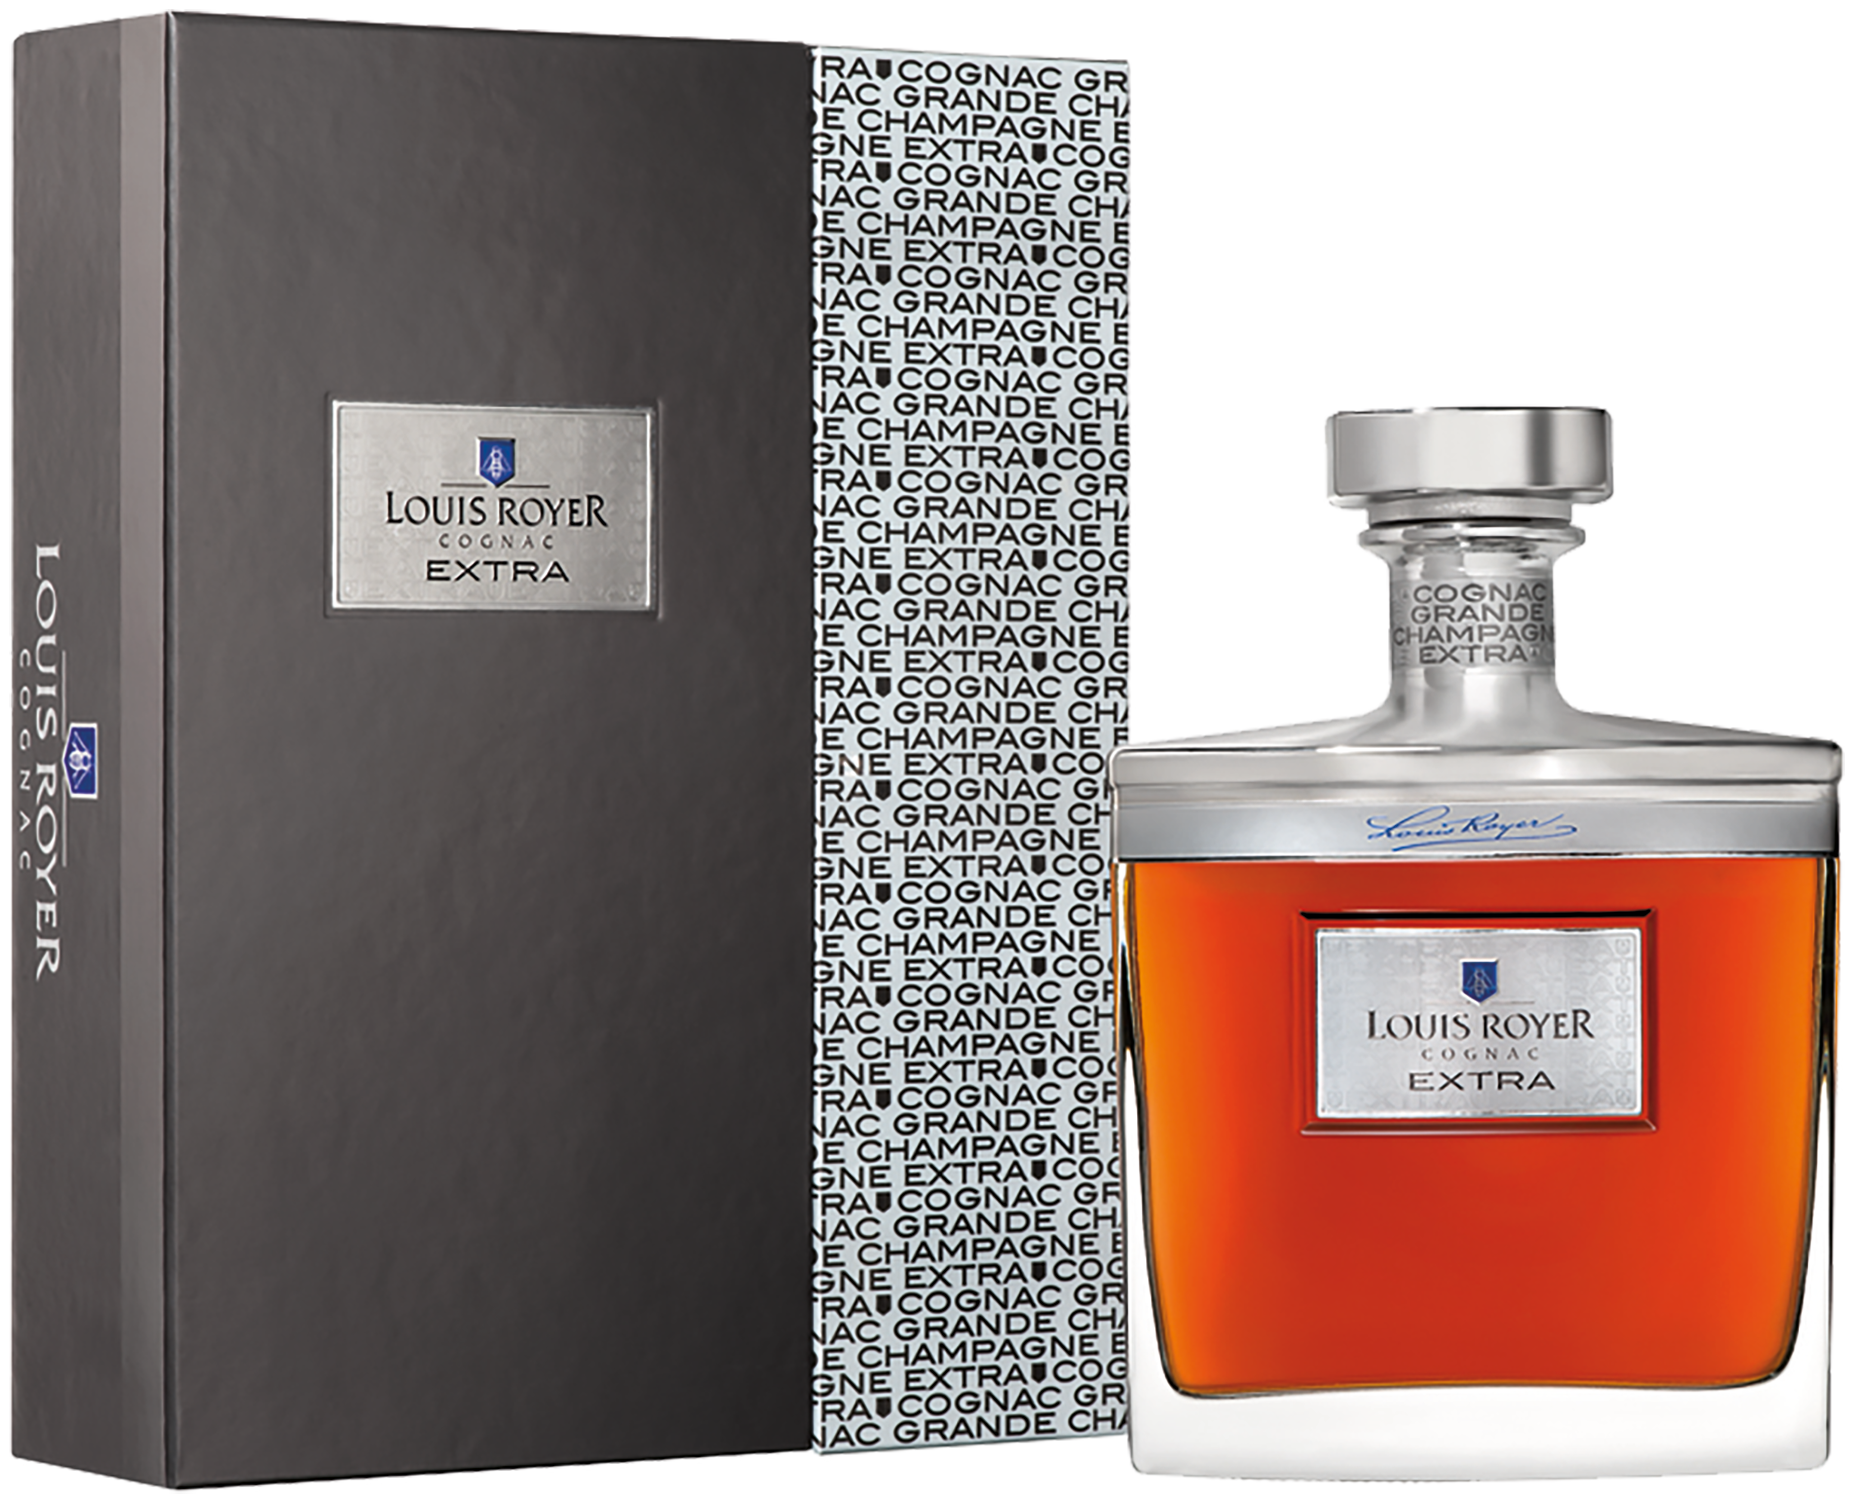 Louis Royer Cognac Grande Champagne Extra (gift box) louis royer cognac xo gift box